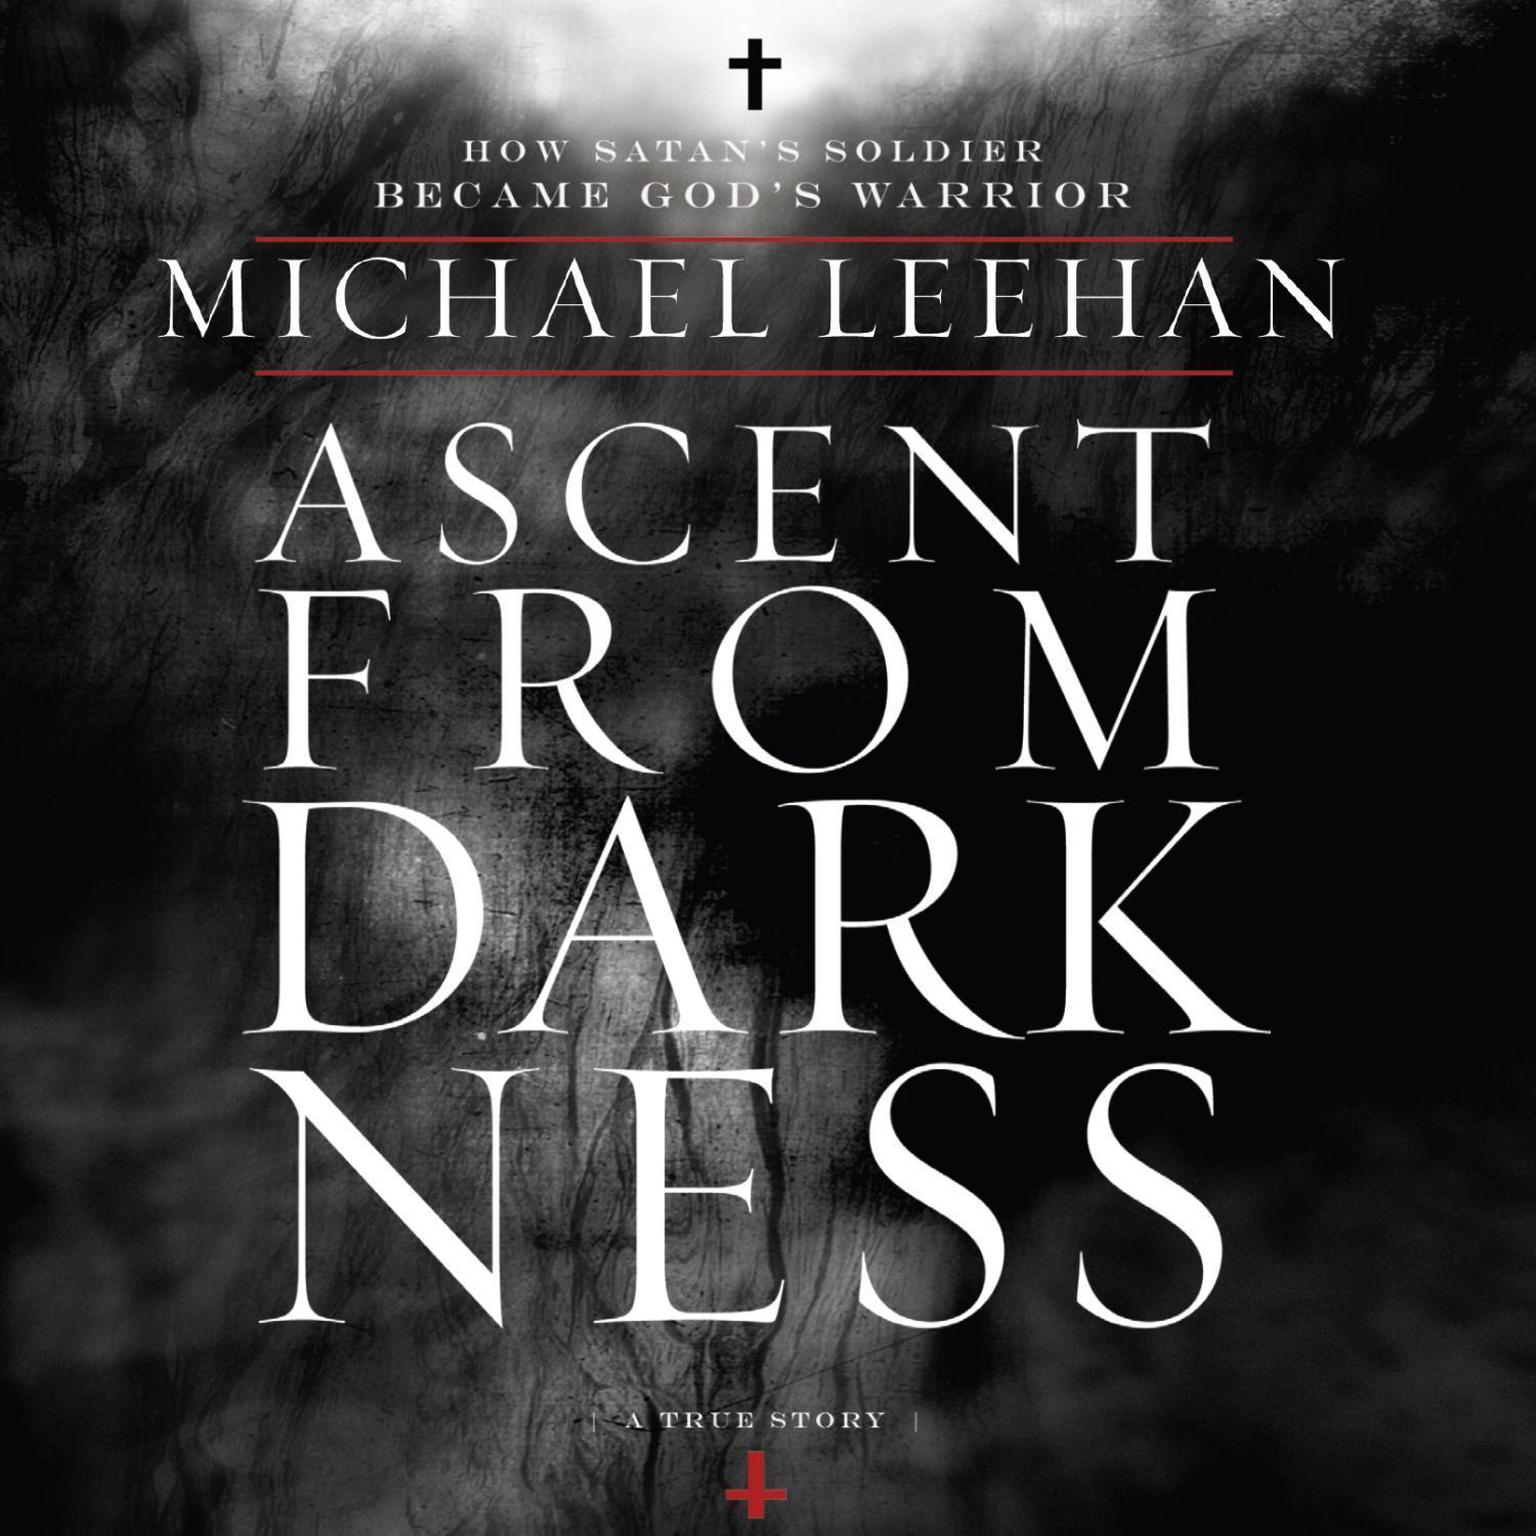 Ascent from Darkness: How Satans Soldier Became Gods Warrior Audiobook, by Michael Leehan